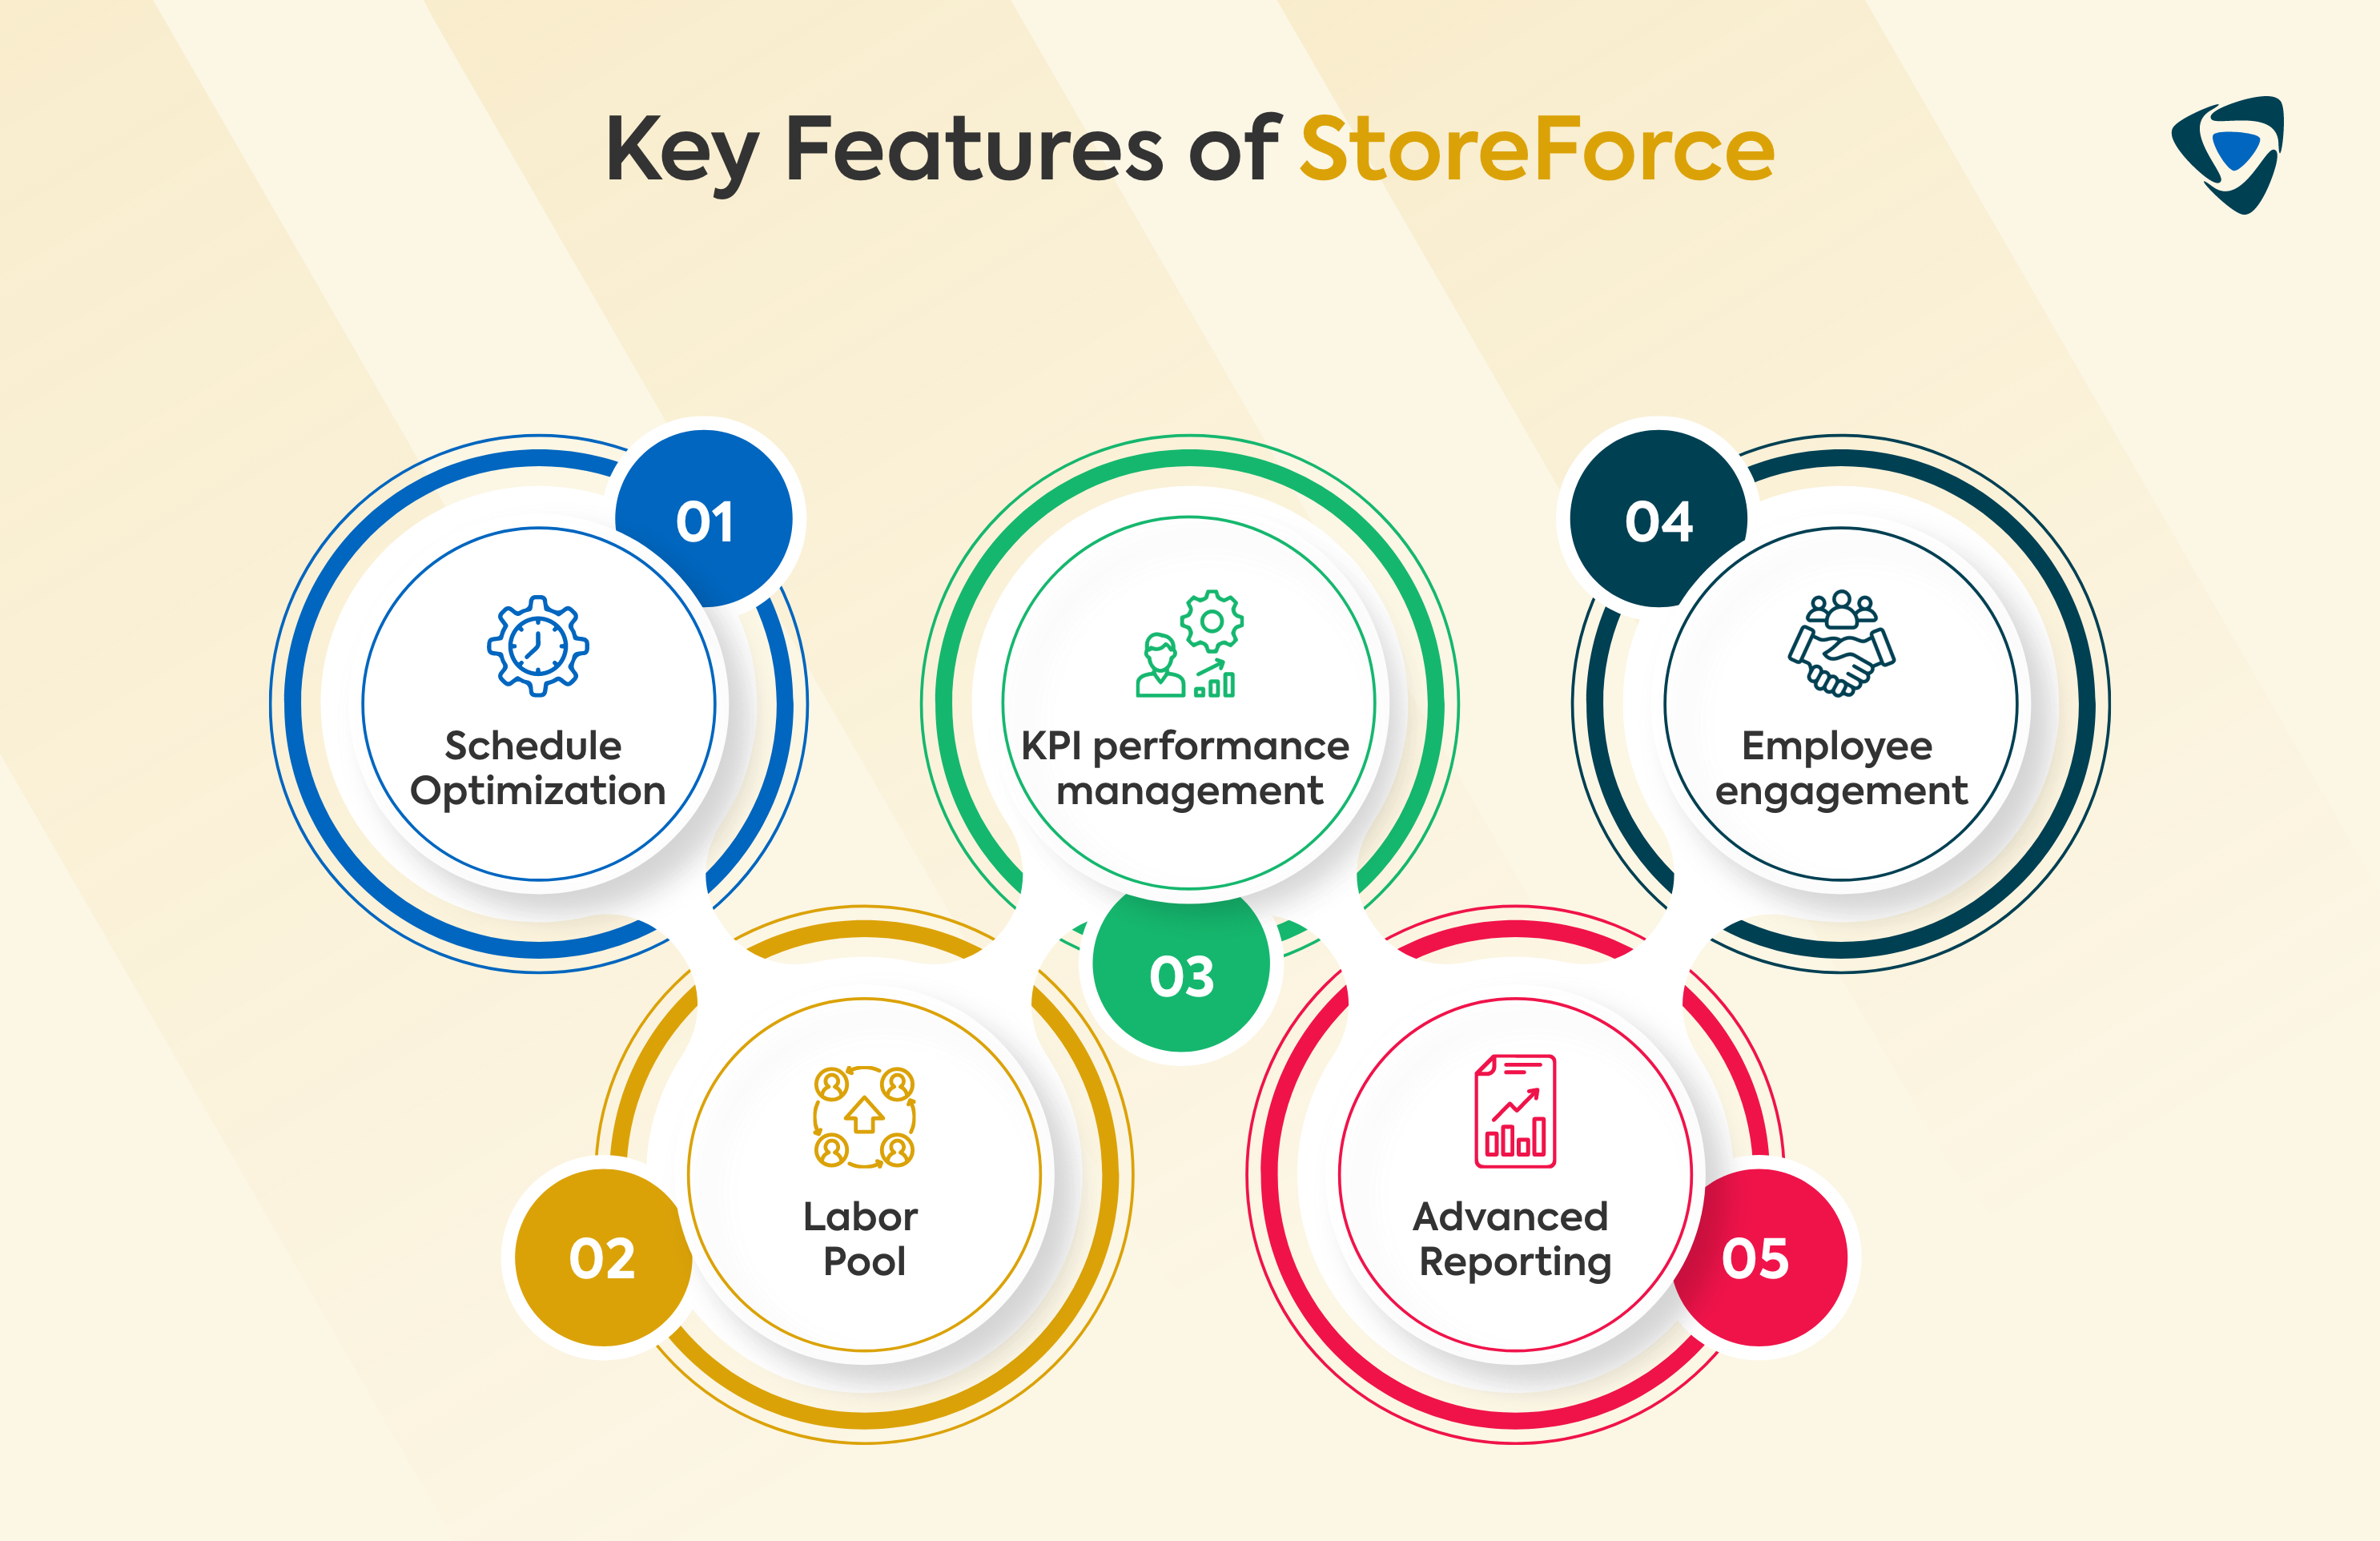 Key Features of StoreForce